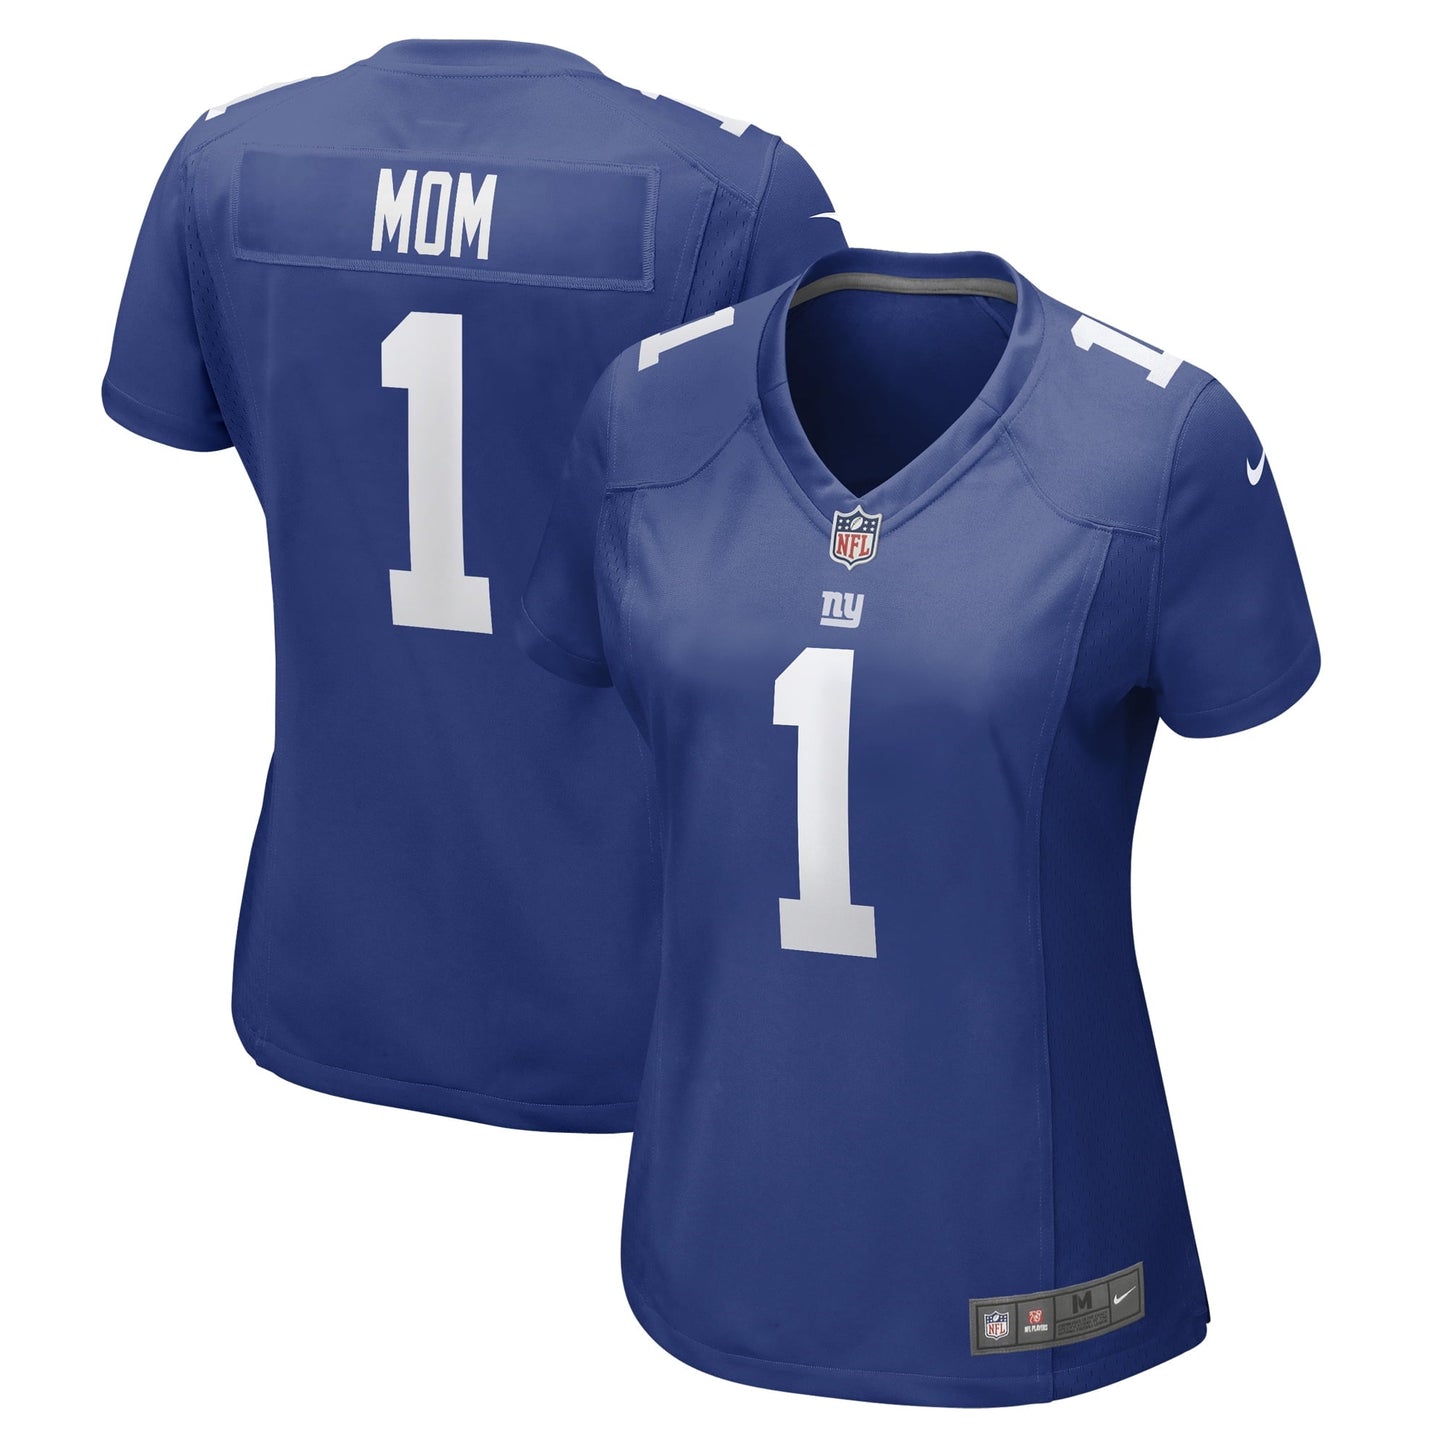 Women's Nike Number 1 Mom Royal New York Giants Game Jersey